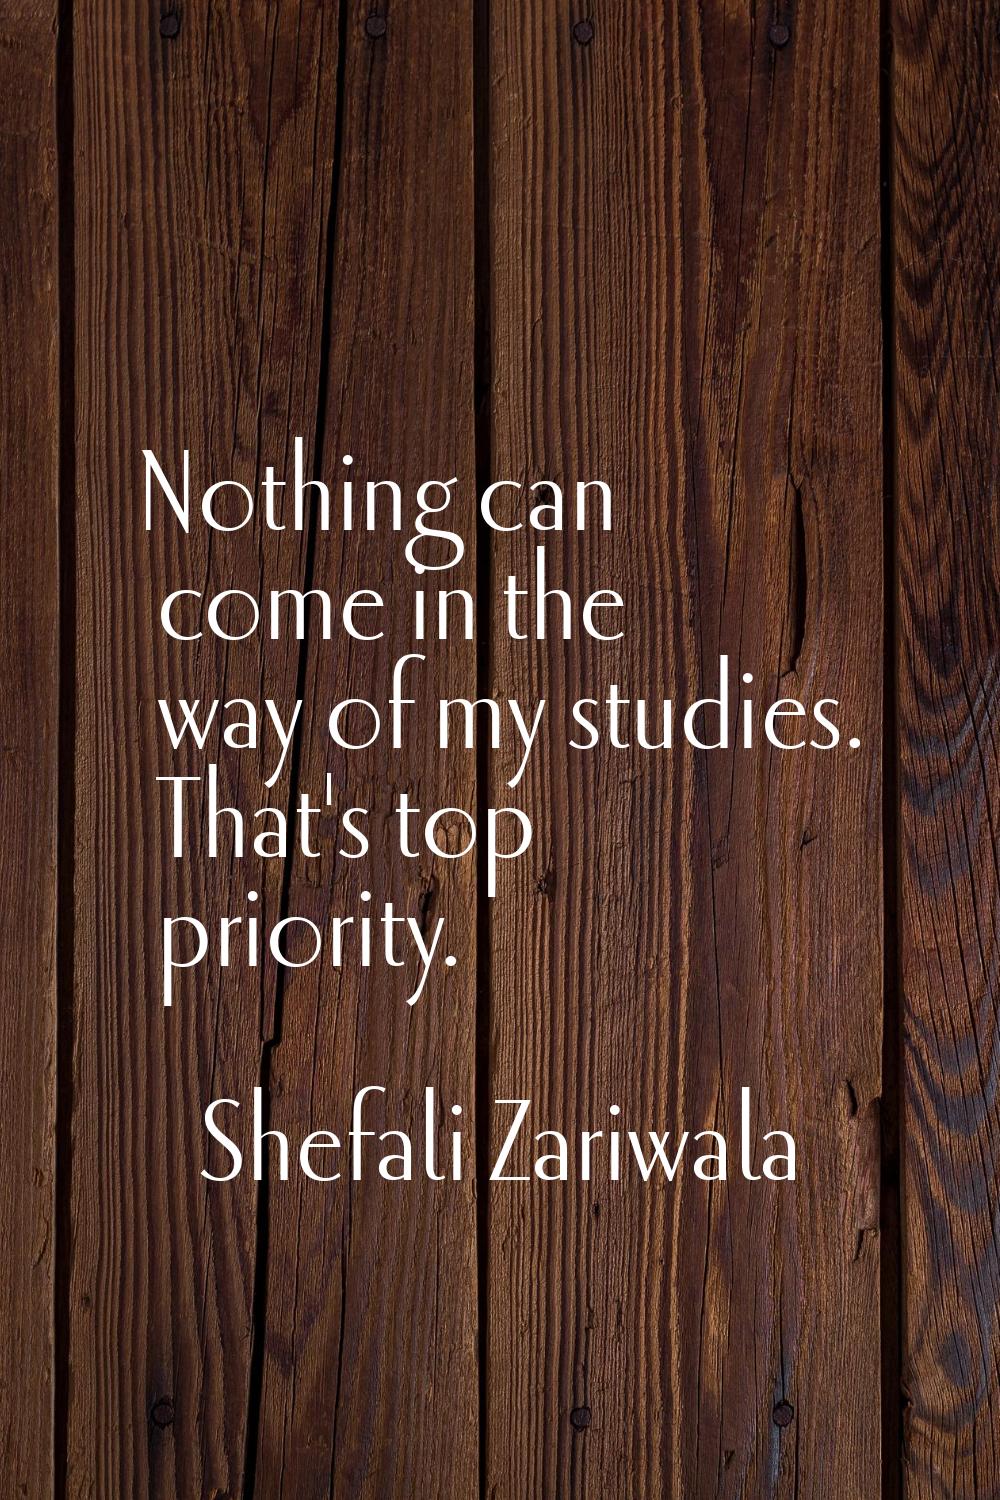 Nothing can come in the way of my studies. That's top priority.